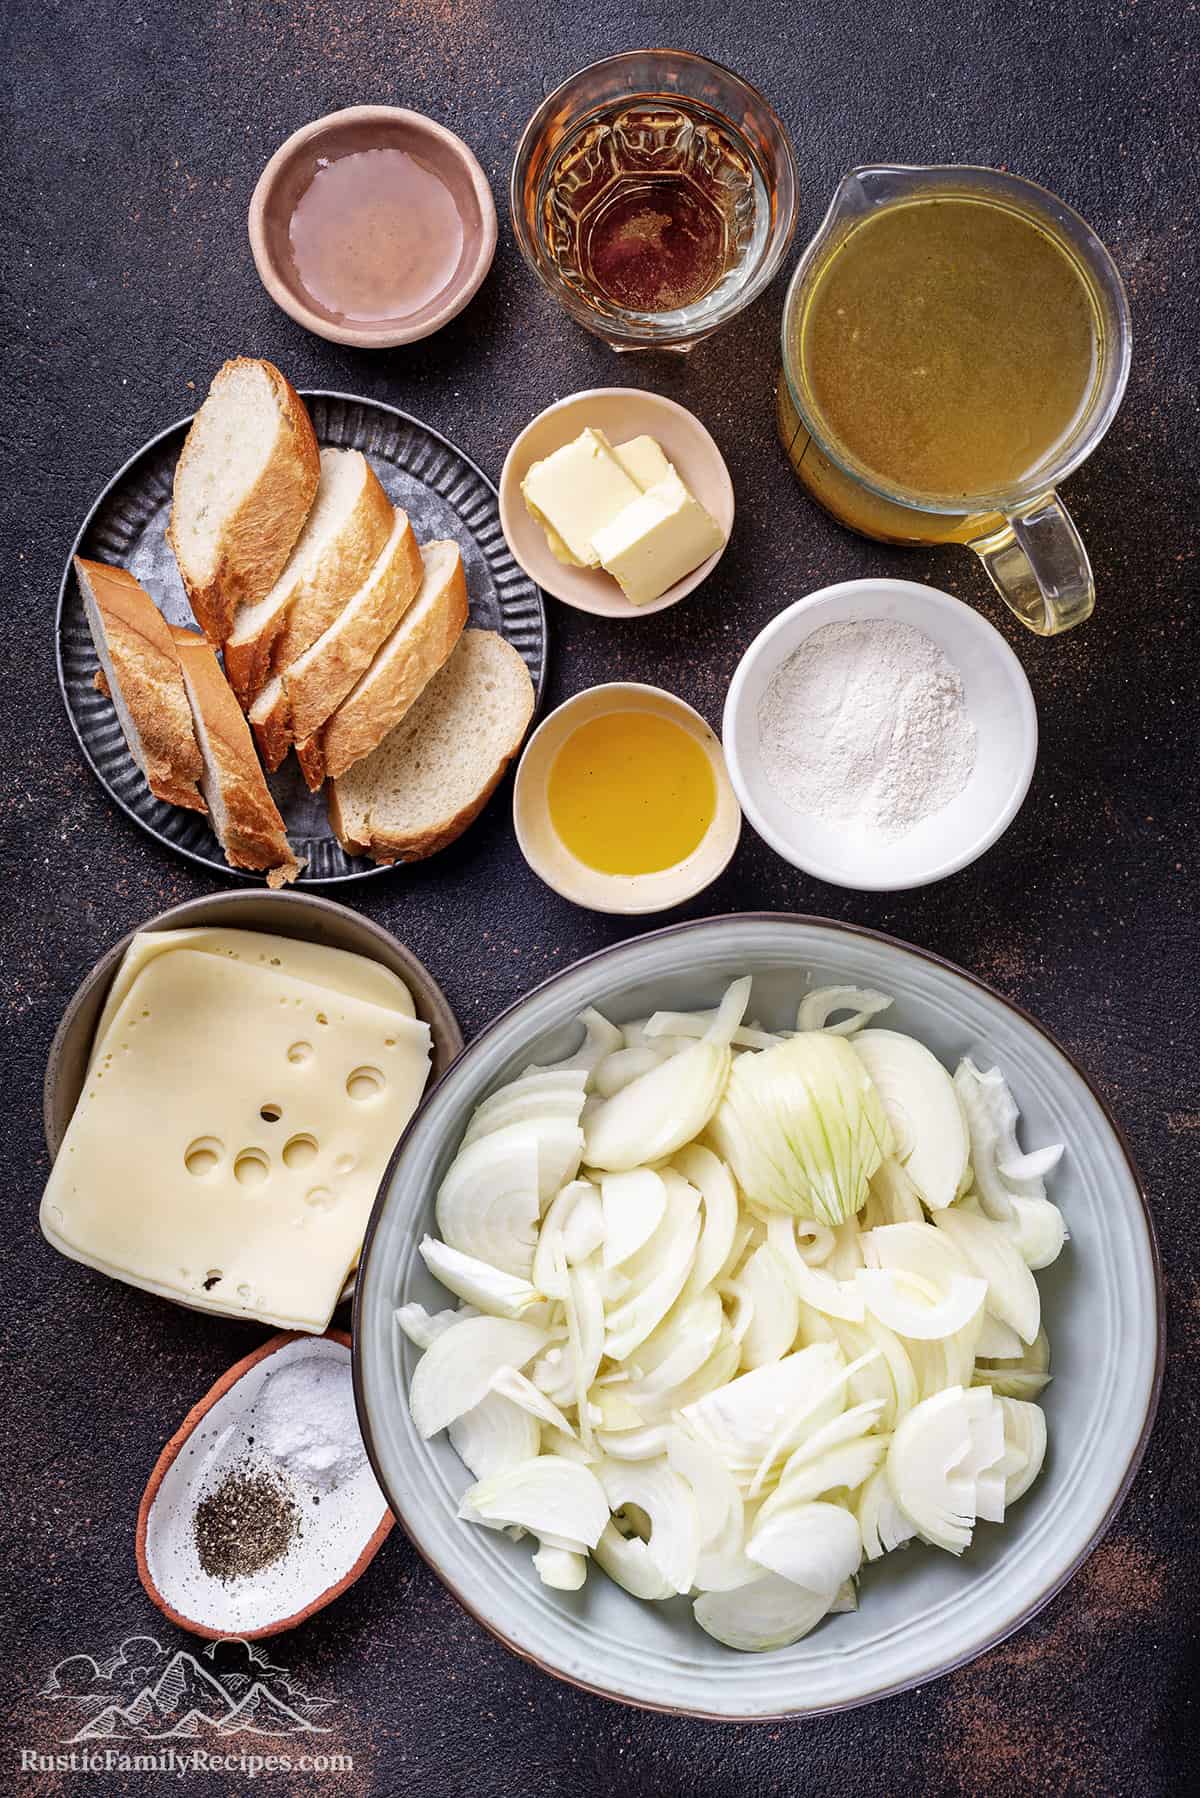 Ingredients for french onion soup on a table